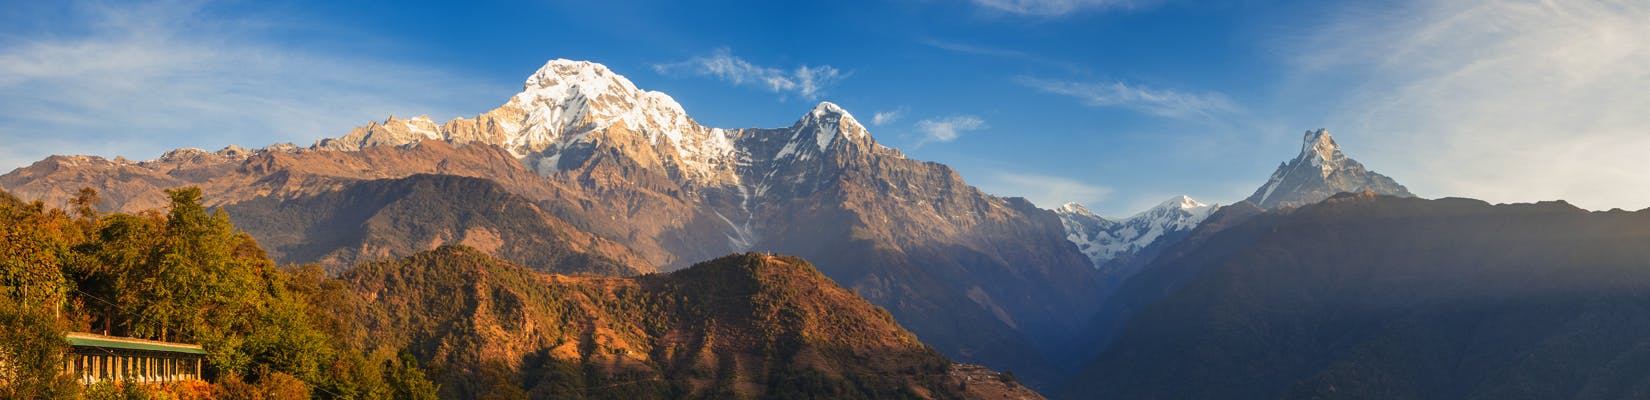 Bandipur: a Tiny Piece of Heaven on Earth for Tour in Nepal